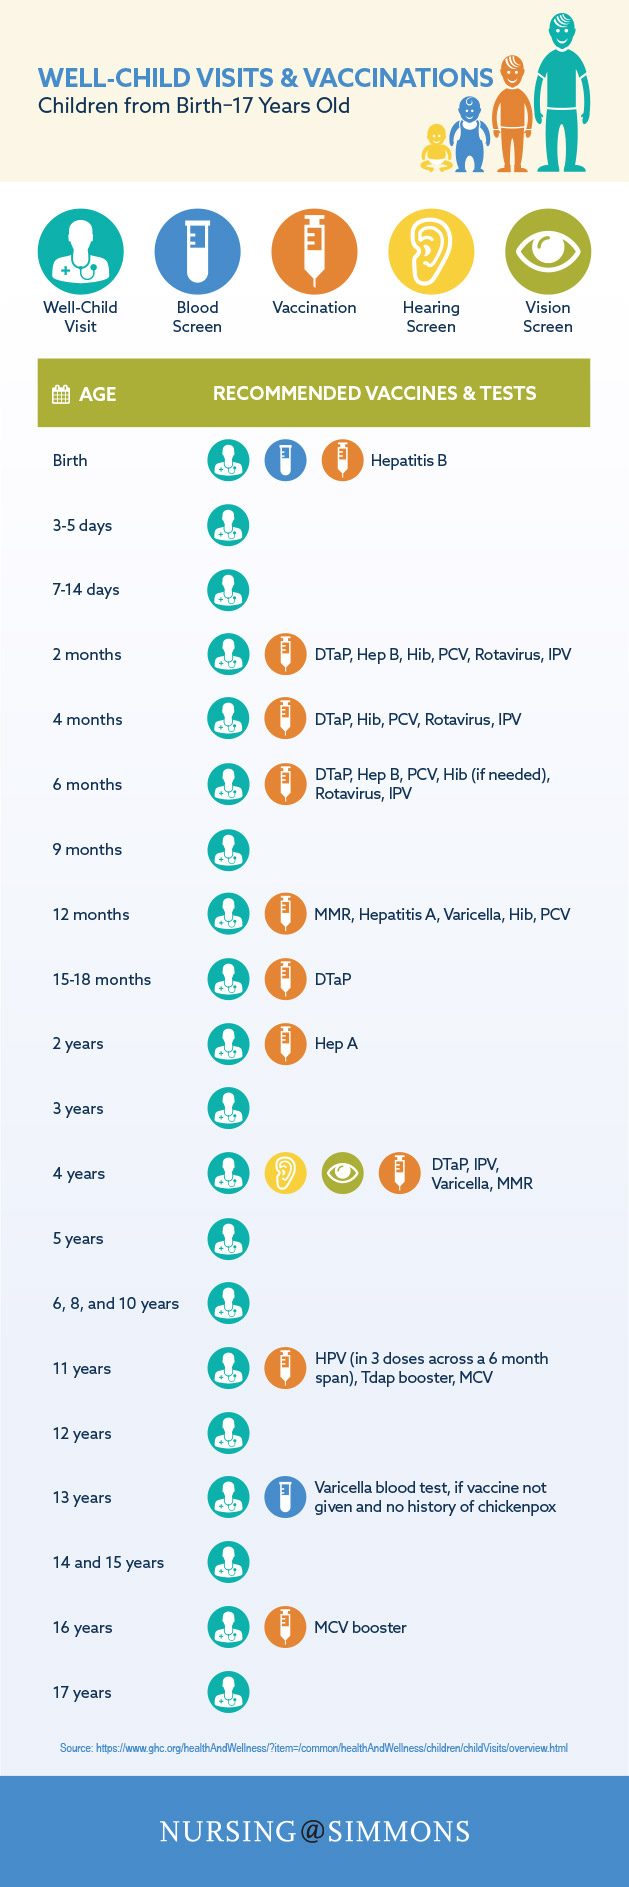 Infographic showing recommended vaccination schedules for children from birth to 17 years old.